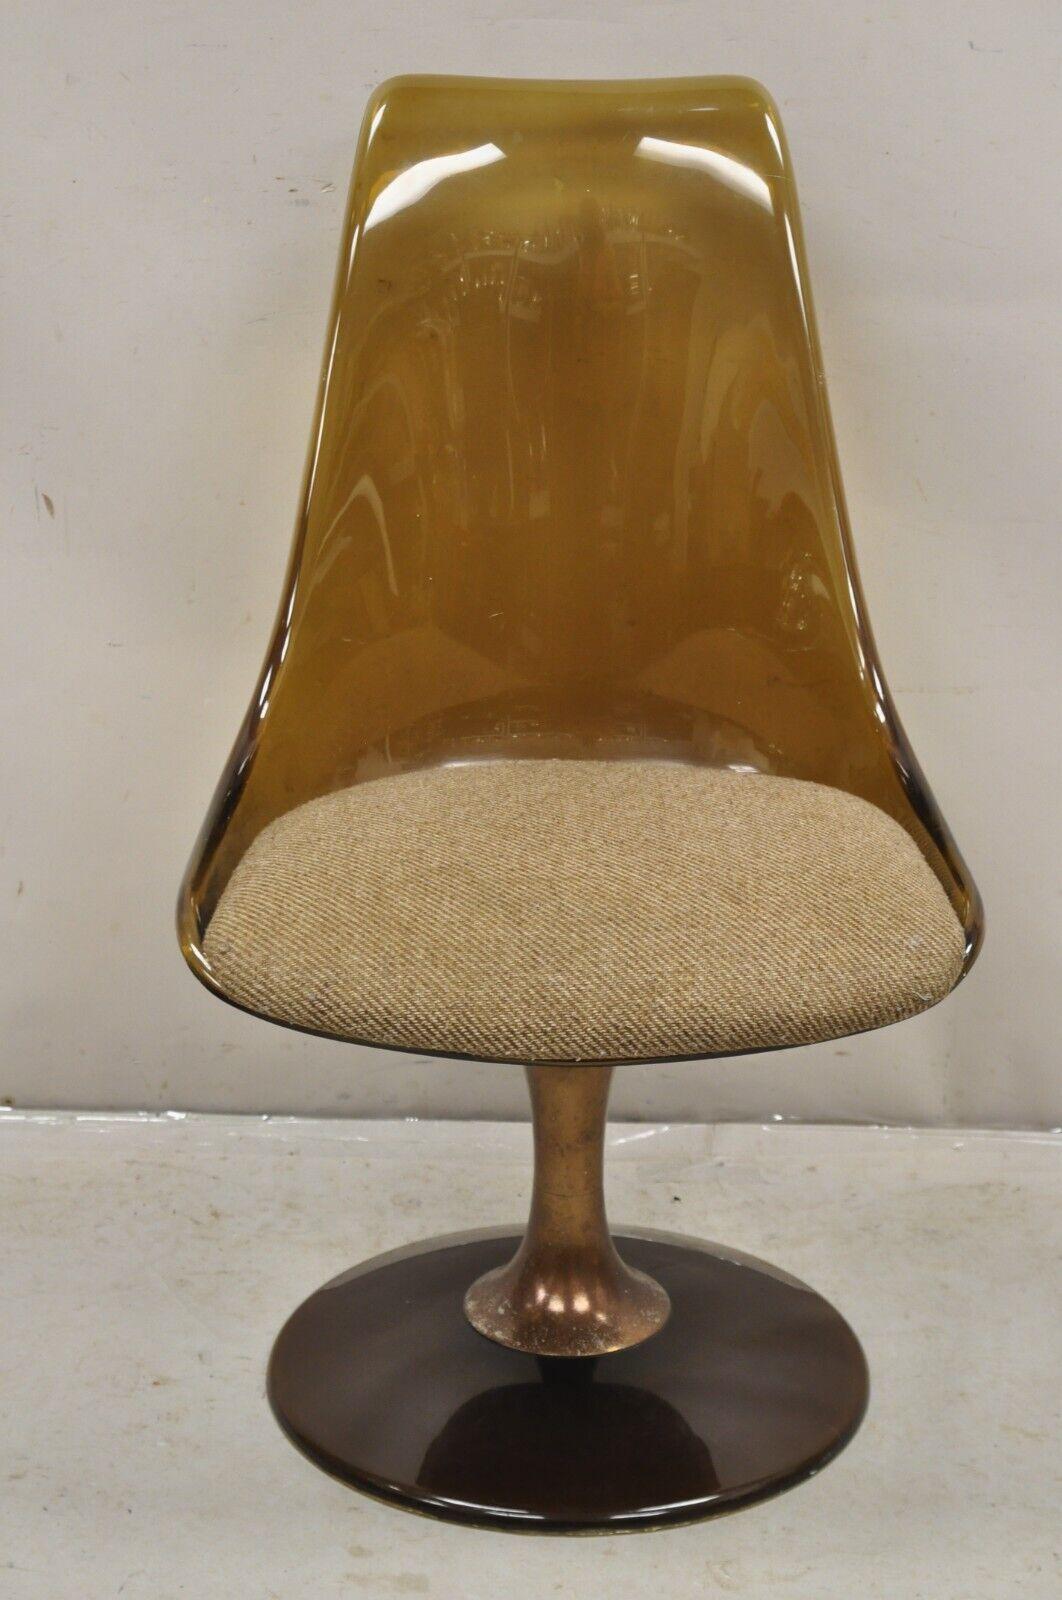 Vintage Chromcraft Mid Century Modern Amber Smoked Lucite Swivel Dining Chair. Item features a swivel pedestal base, original label very nice vintage item. Circa 1960s. Measurements: 35